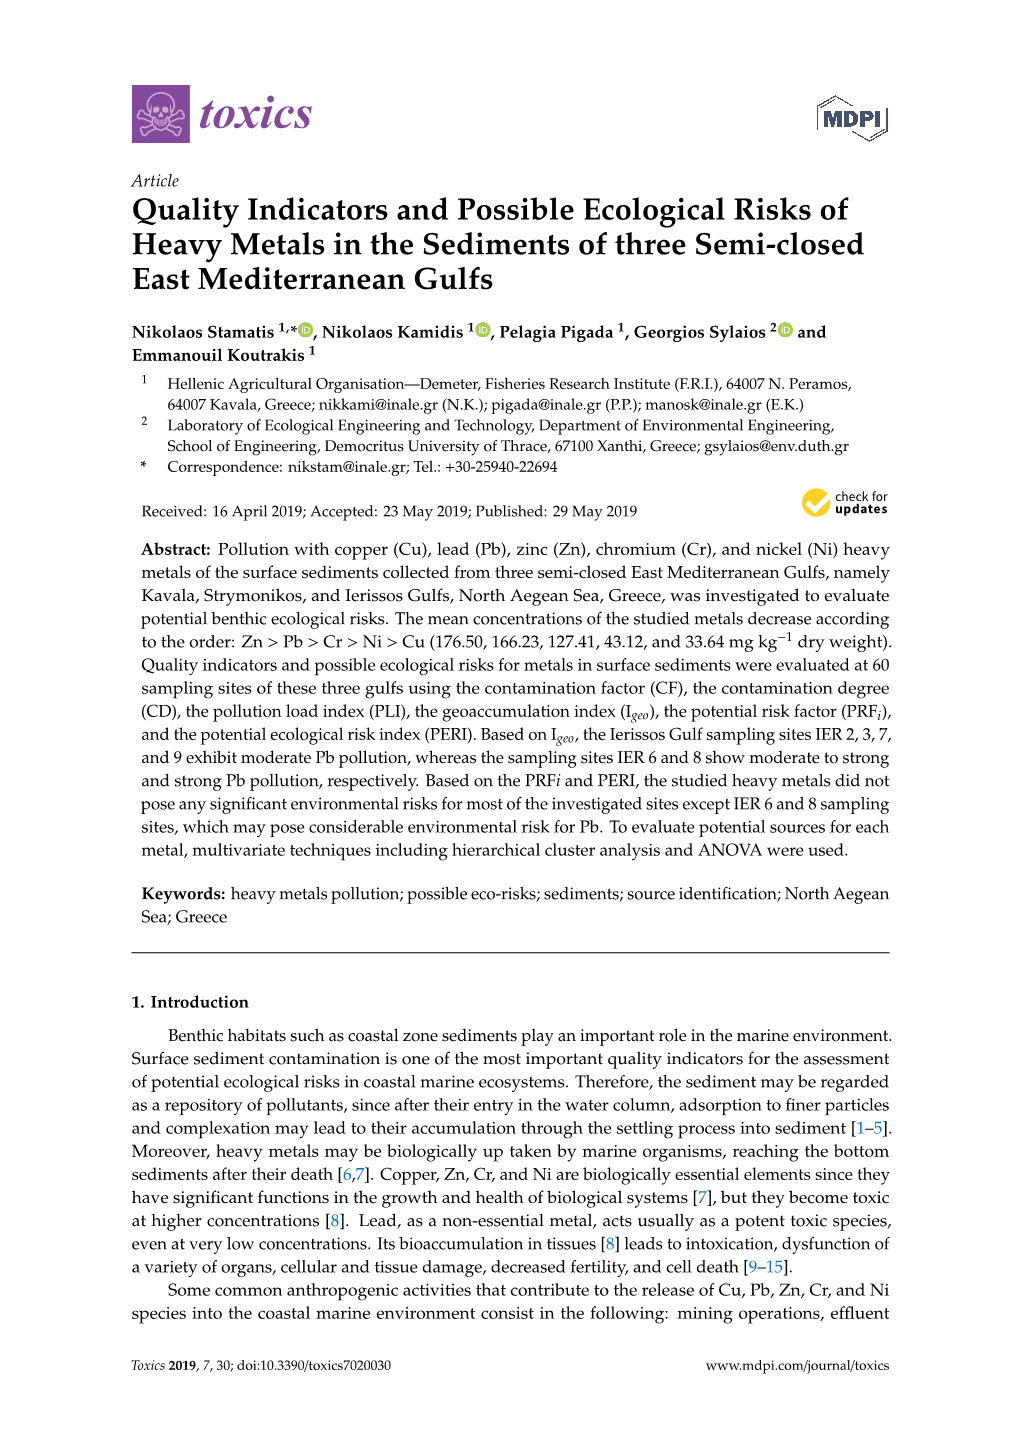 Quality Indicators and Possible Ecological Risks of Heavy Metals in the Sediments of Three Semi-Closed East Mediterranean Gulfs